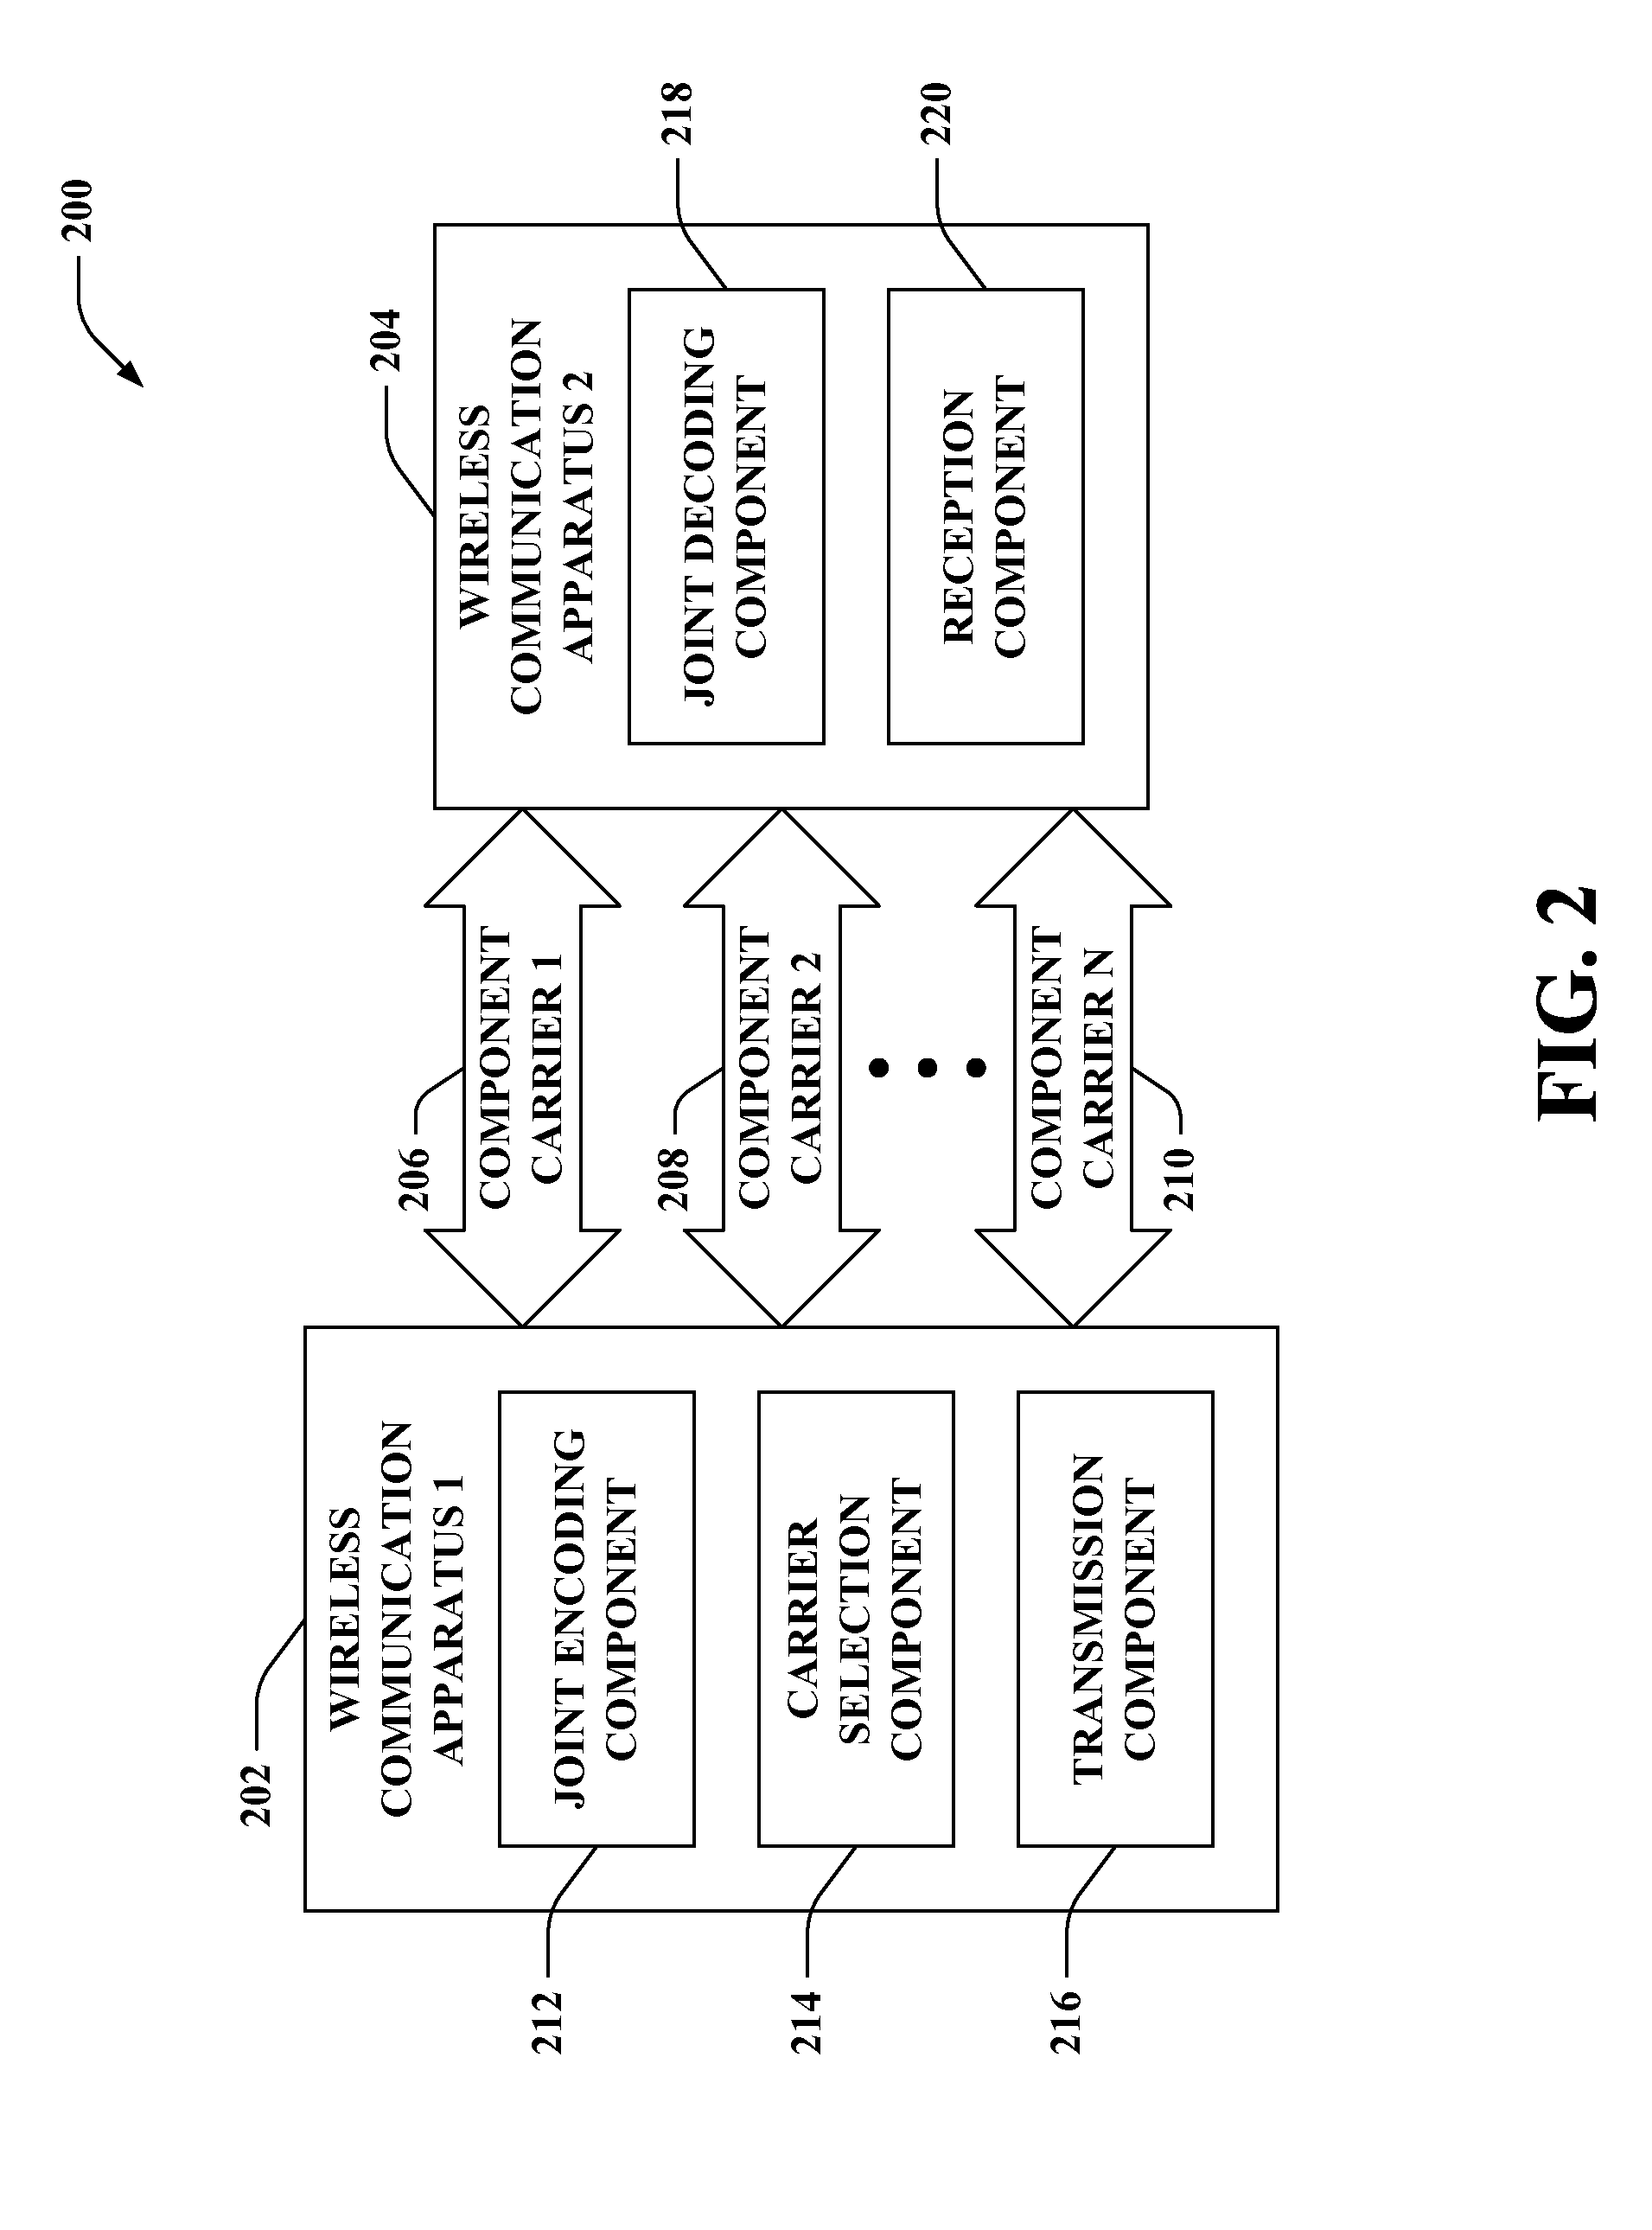 Joint layer 3 signalling coding for multicarrier operation